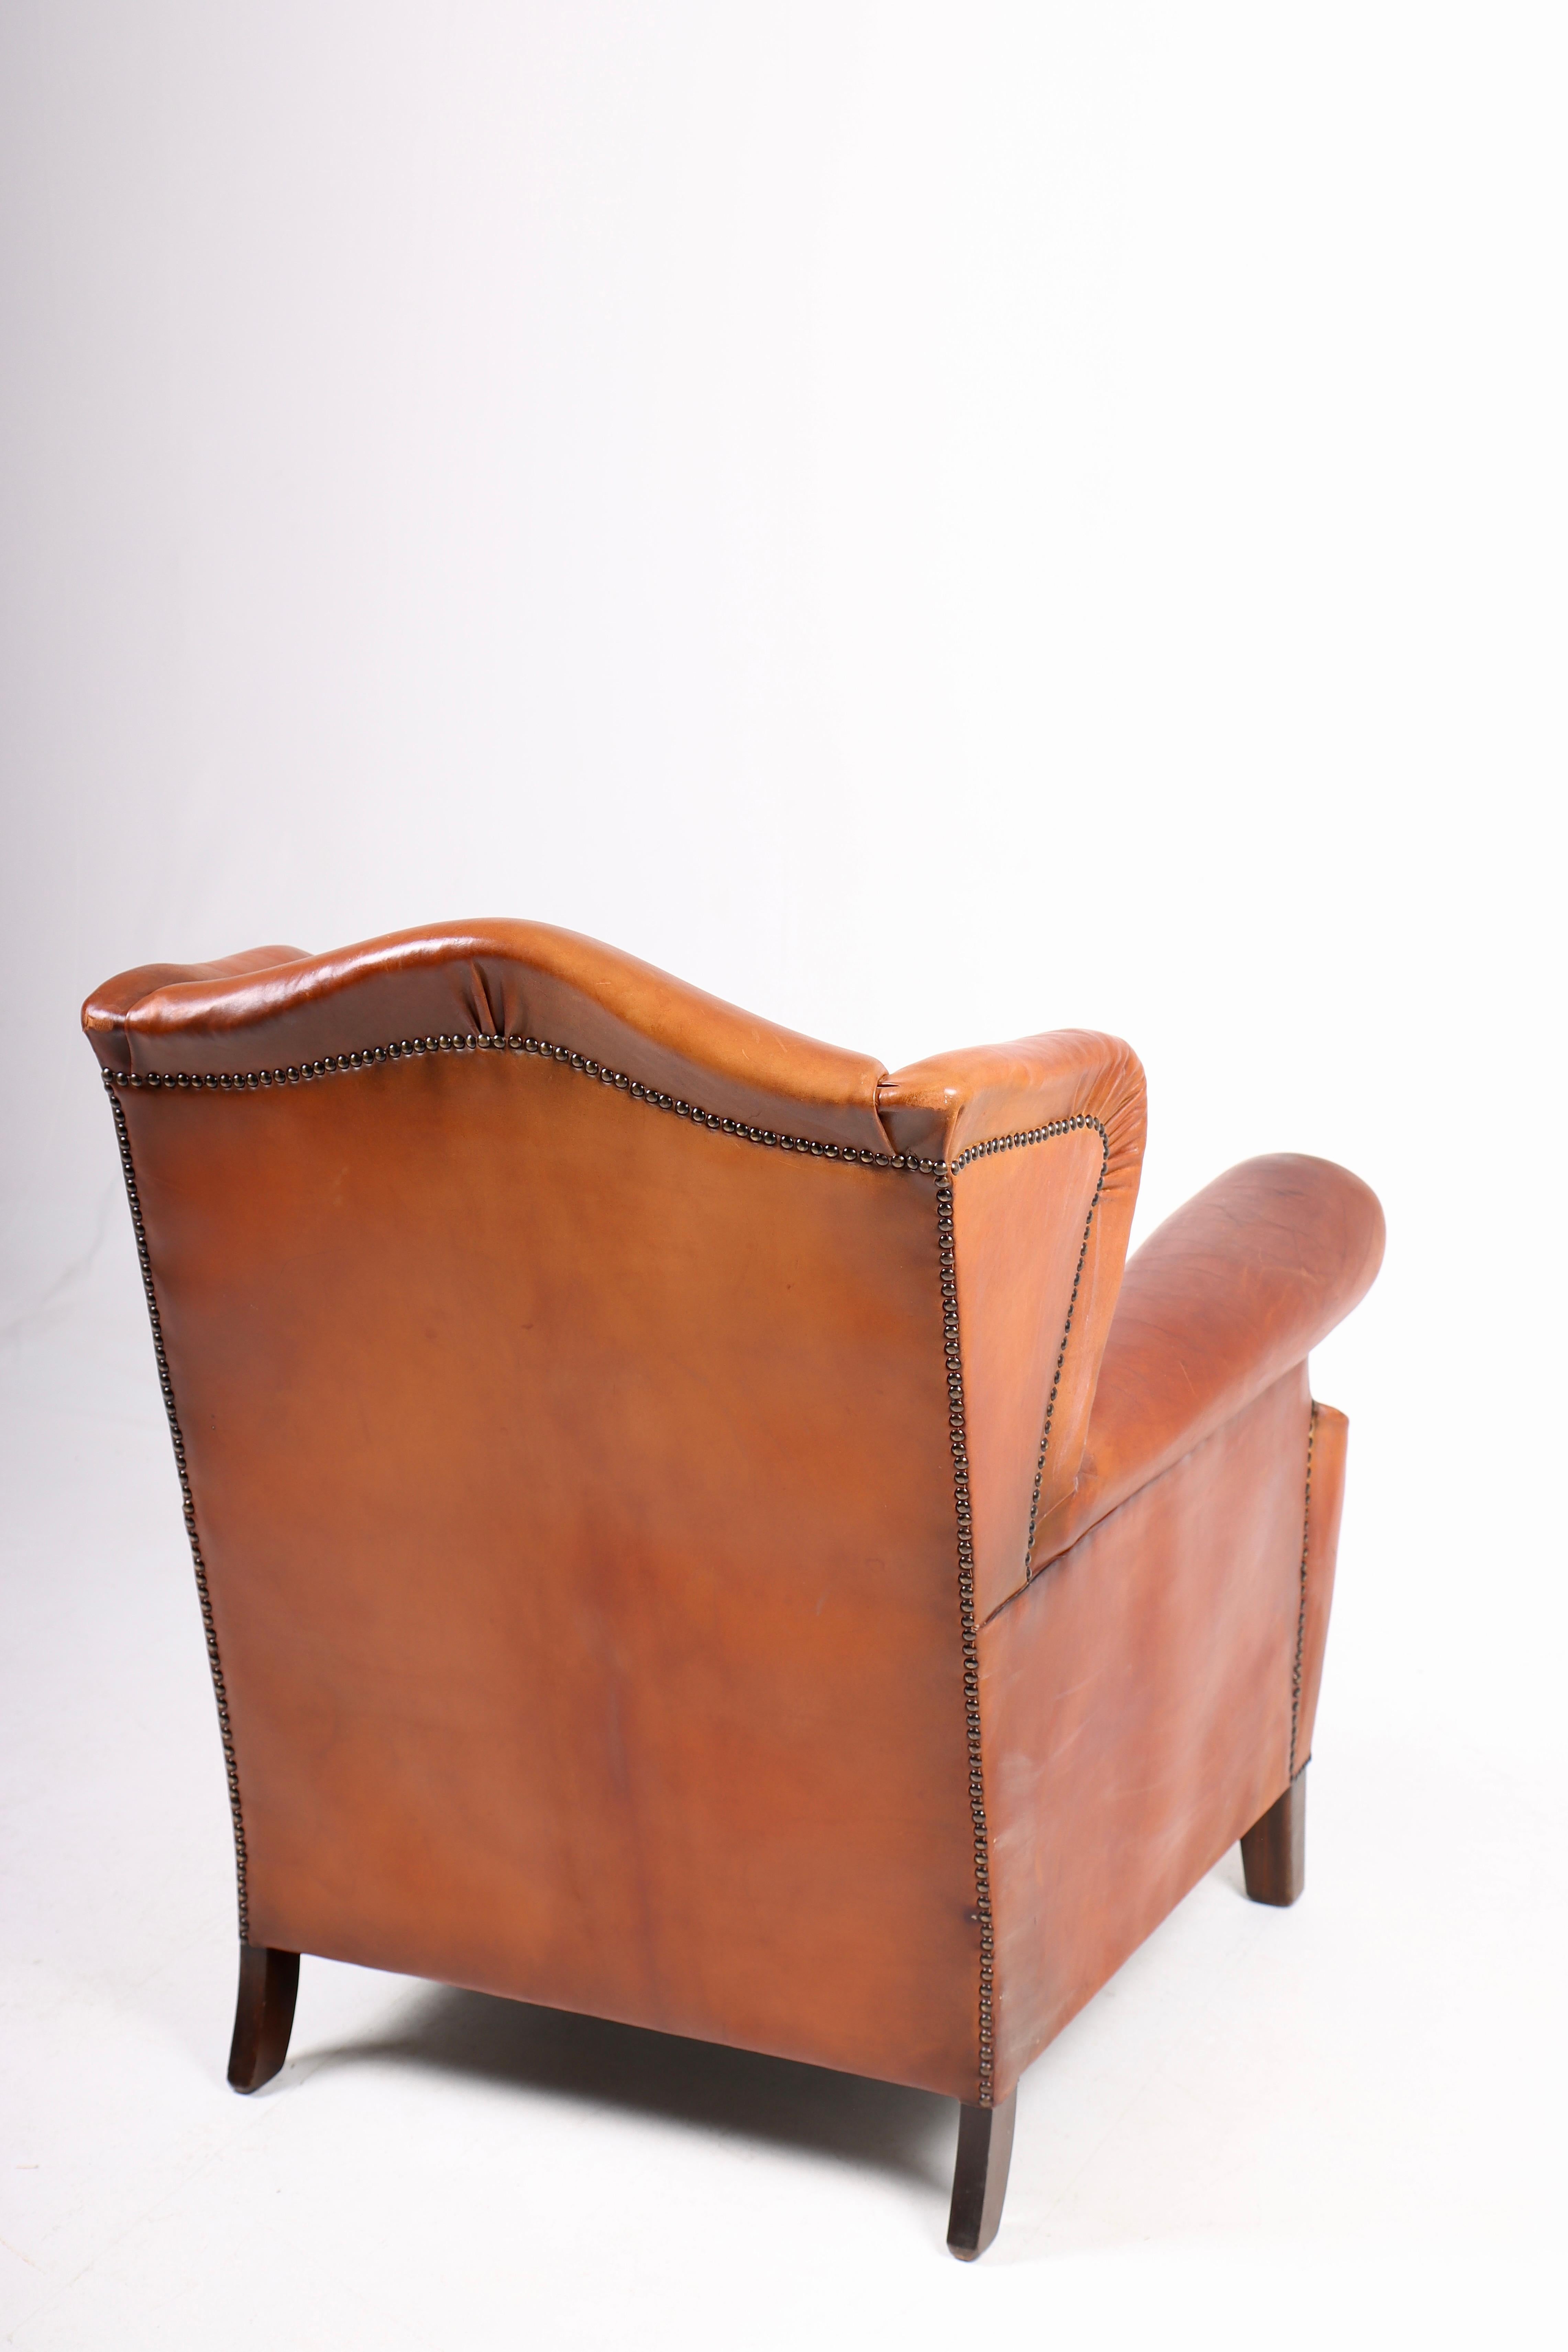 Mid-20th Century Wingback Chair in Cognac Leather, Denmark, 1940s For Sale